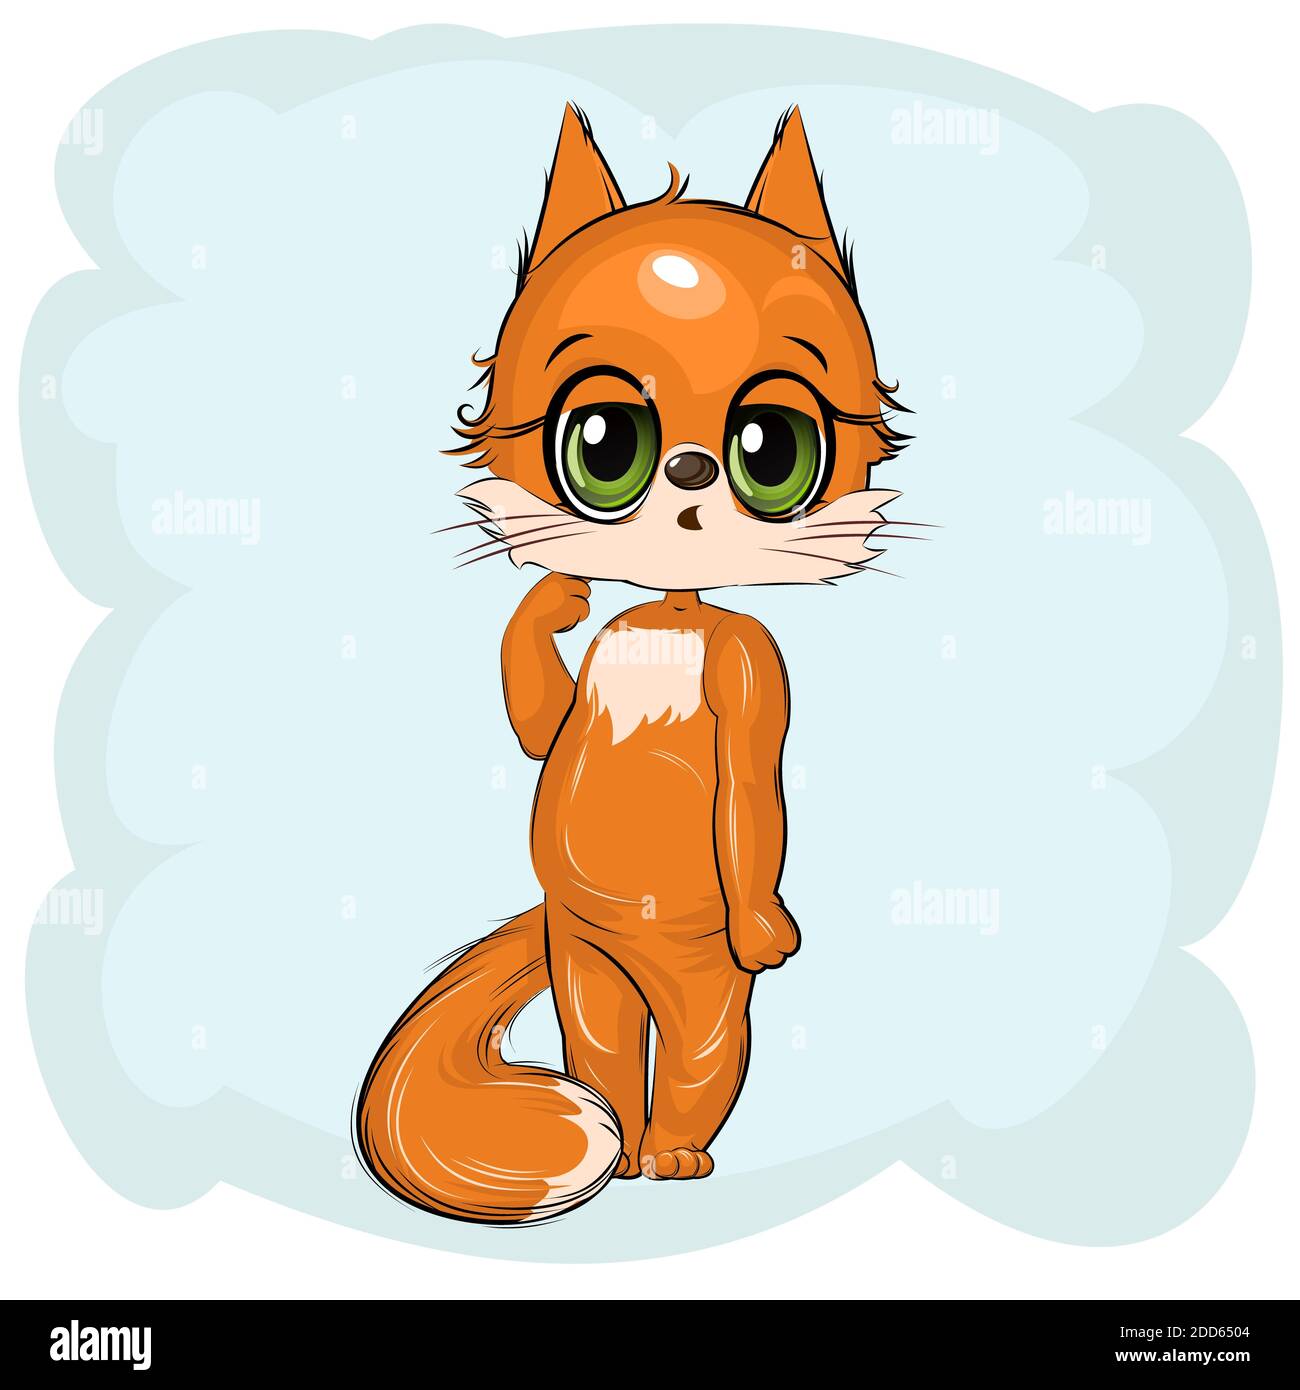 Little Fox. Cute funny animal on an abstract background. Child. Cartoon style. Isolated on white. Stock Photo